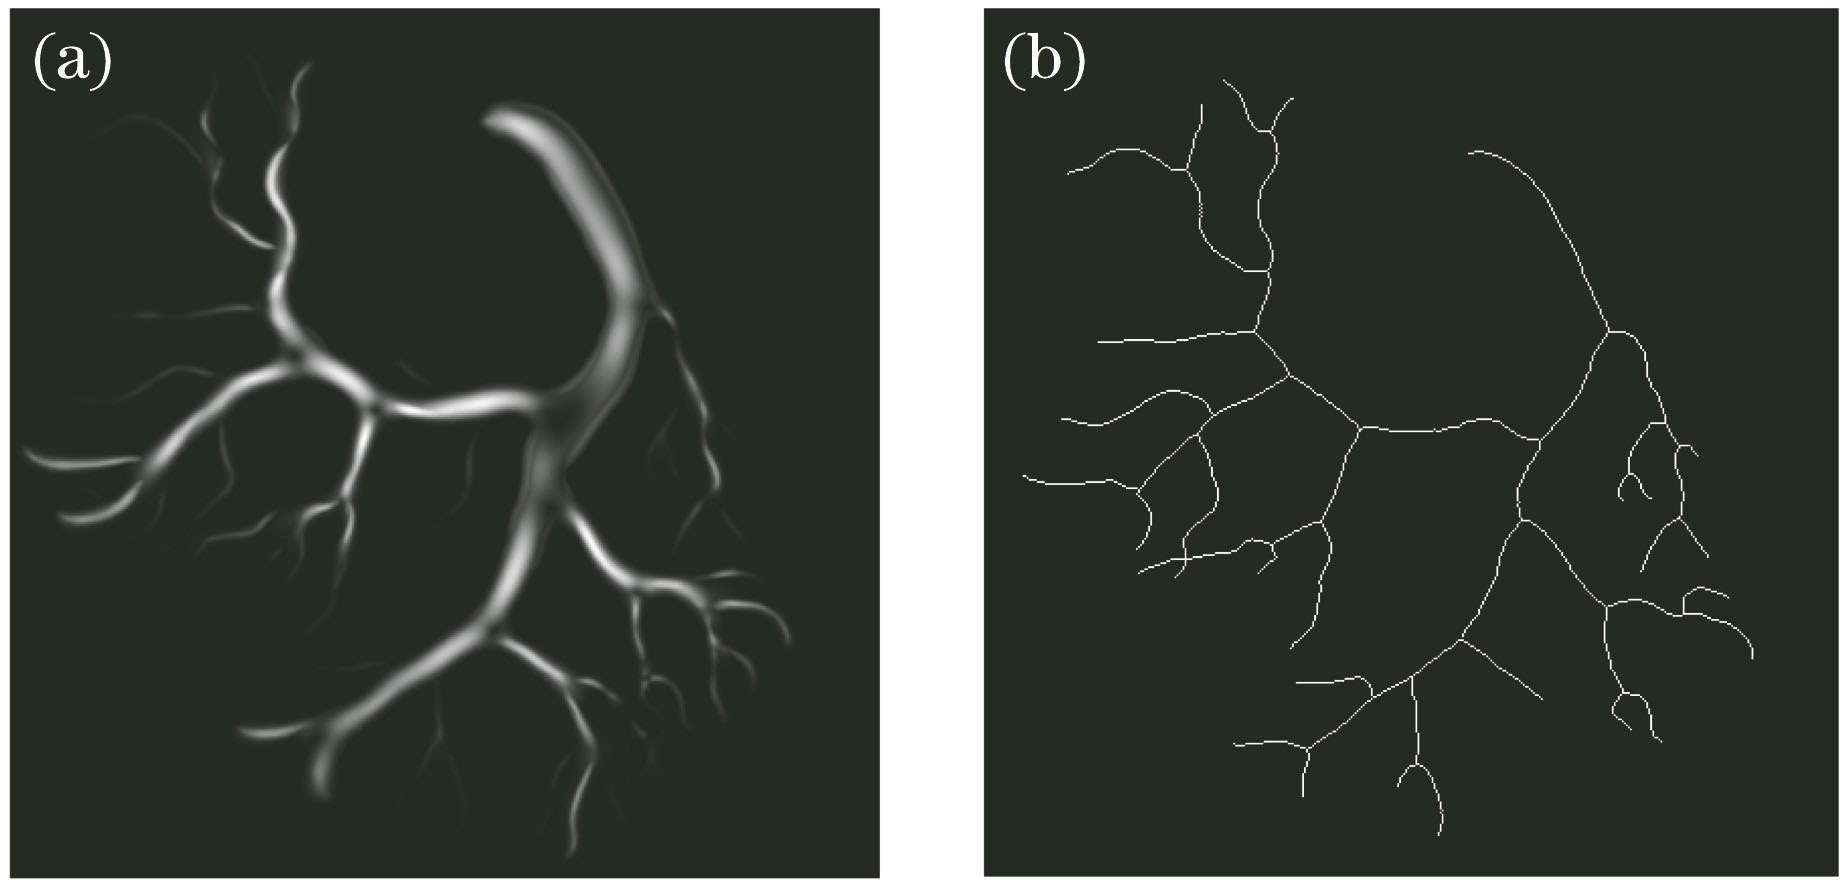 Extracted central axis of blood vessel. (a) Blood vessel after multi-scale self-adaptive filtering; (b) central axis of blood vessel